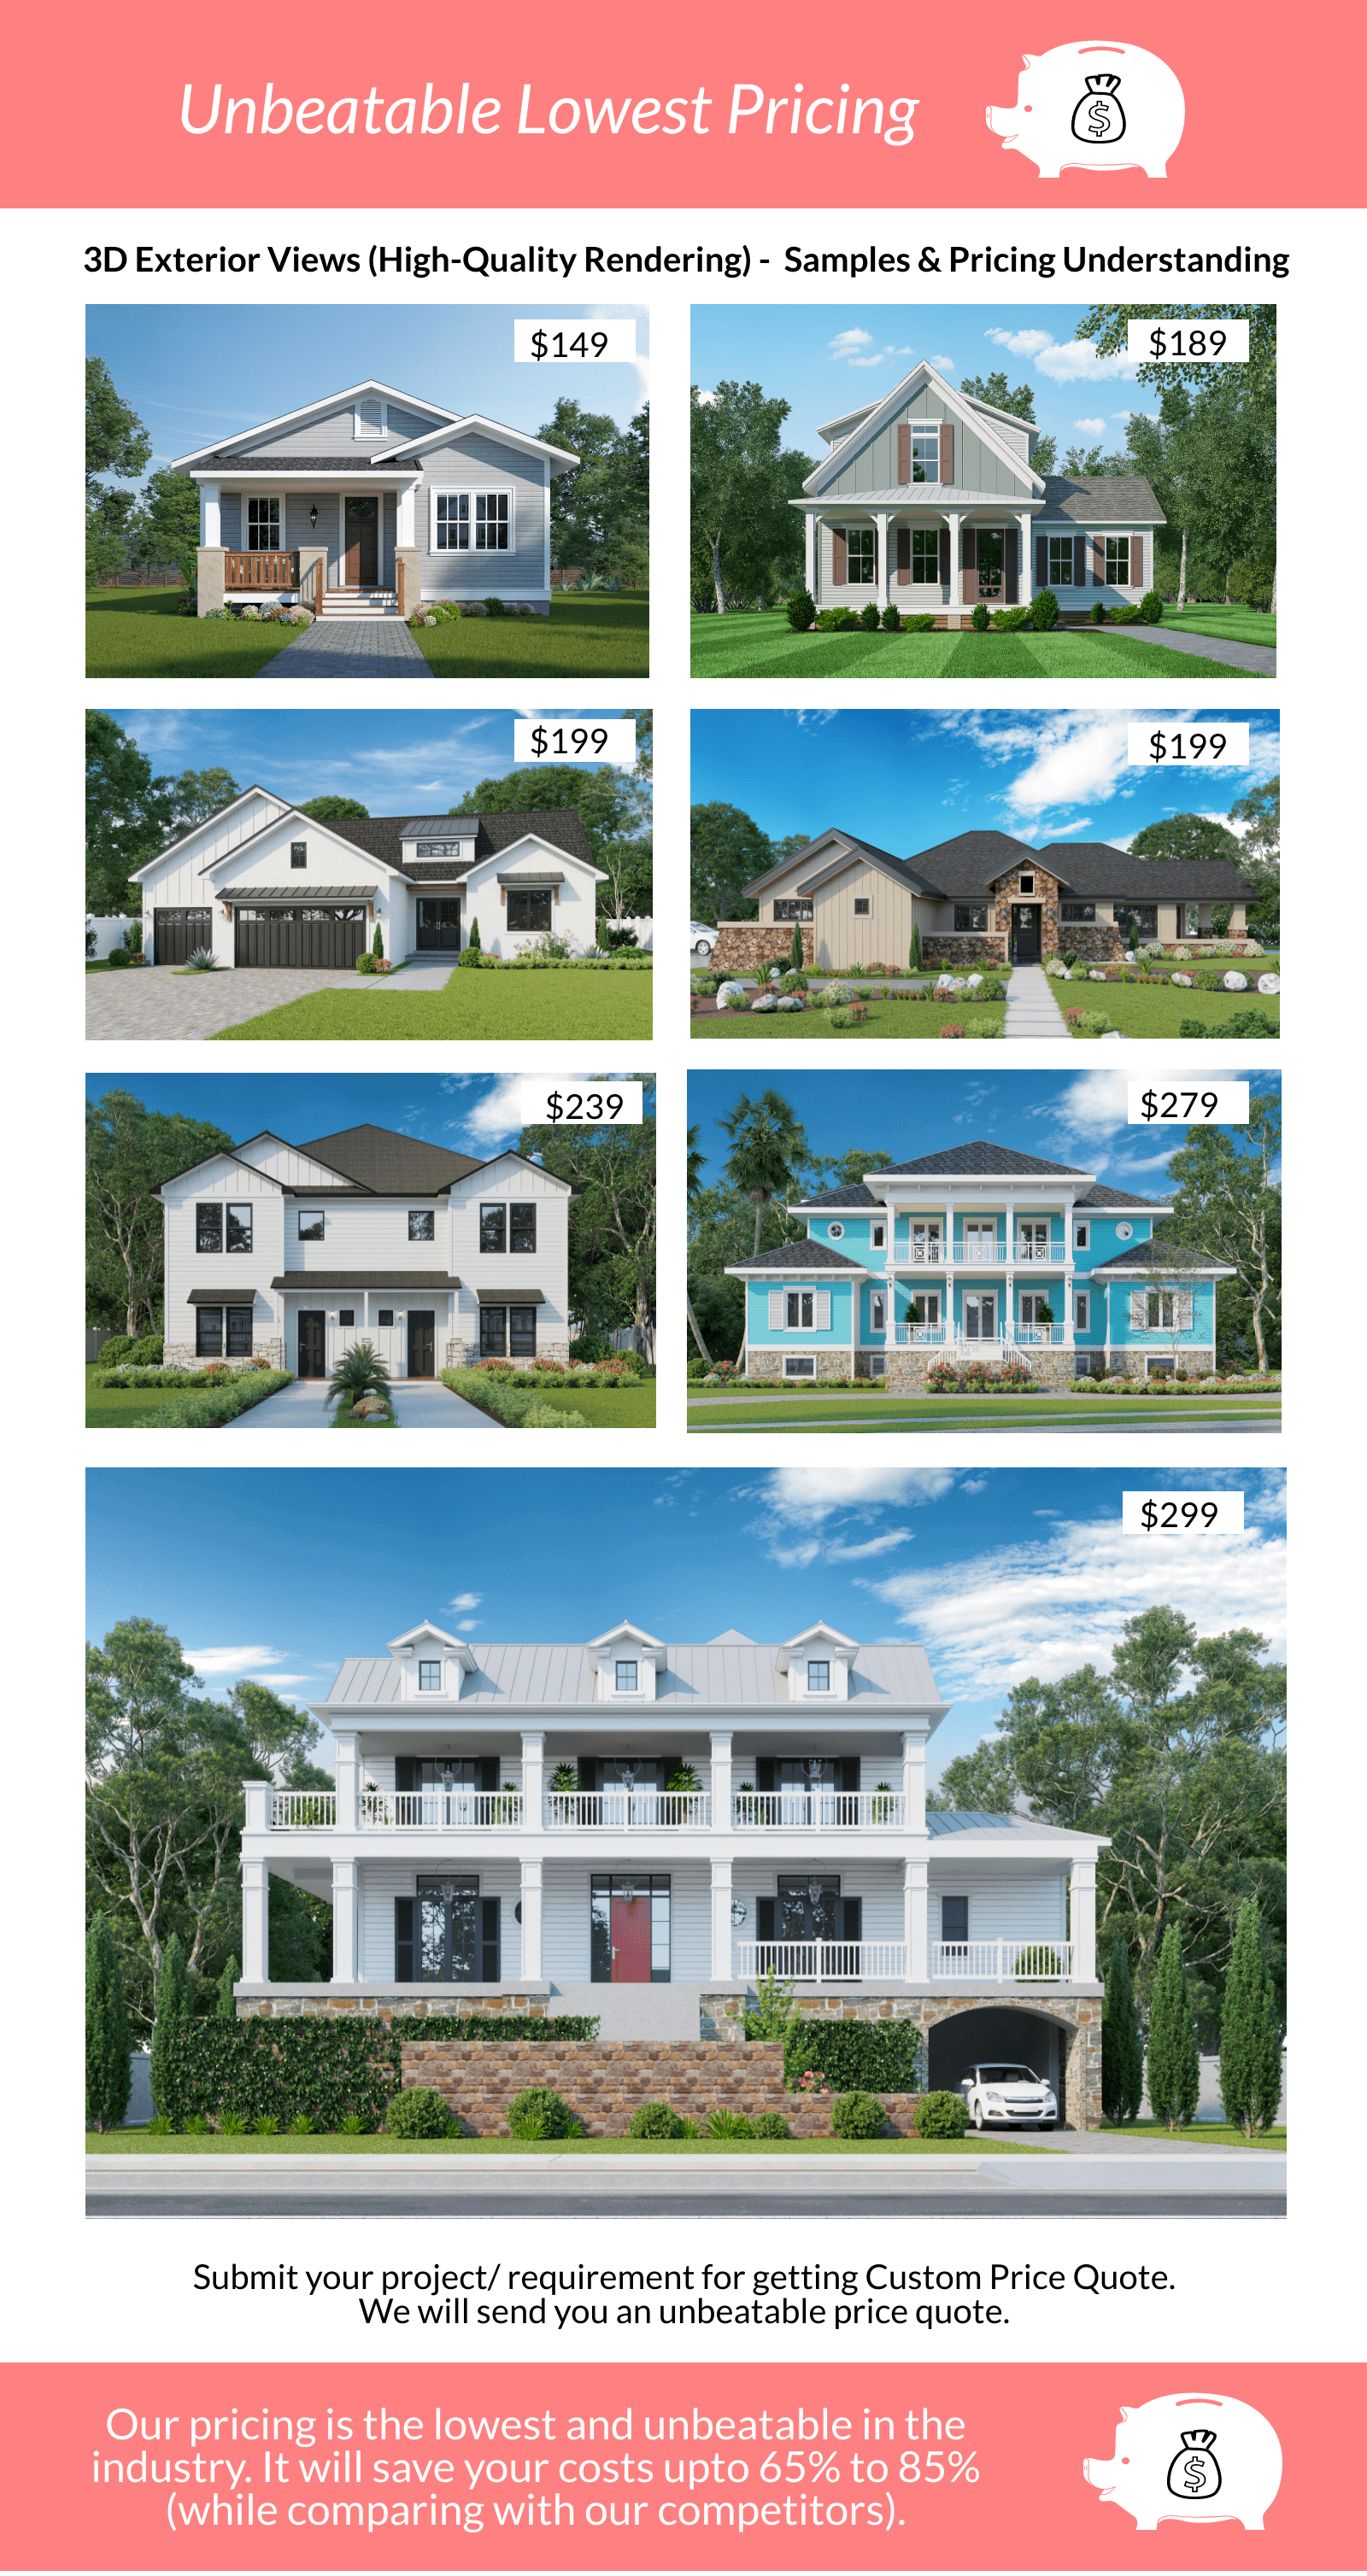 3D Exterior Real Estate Rendering Prices Cost